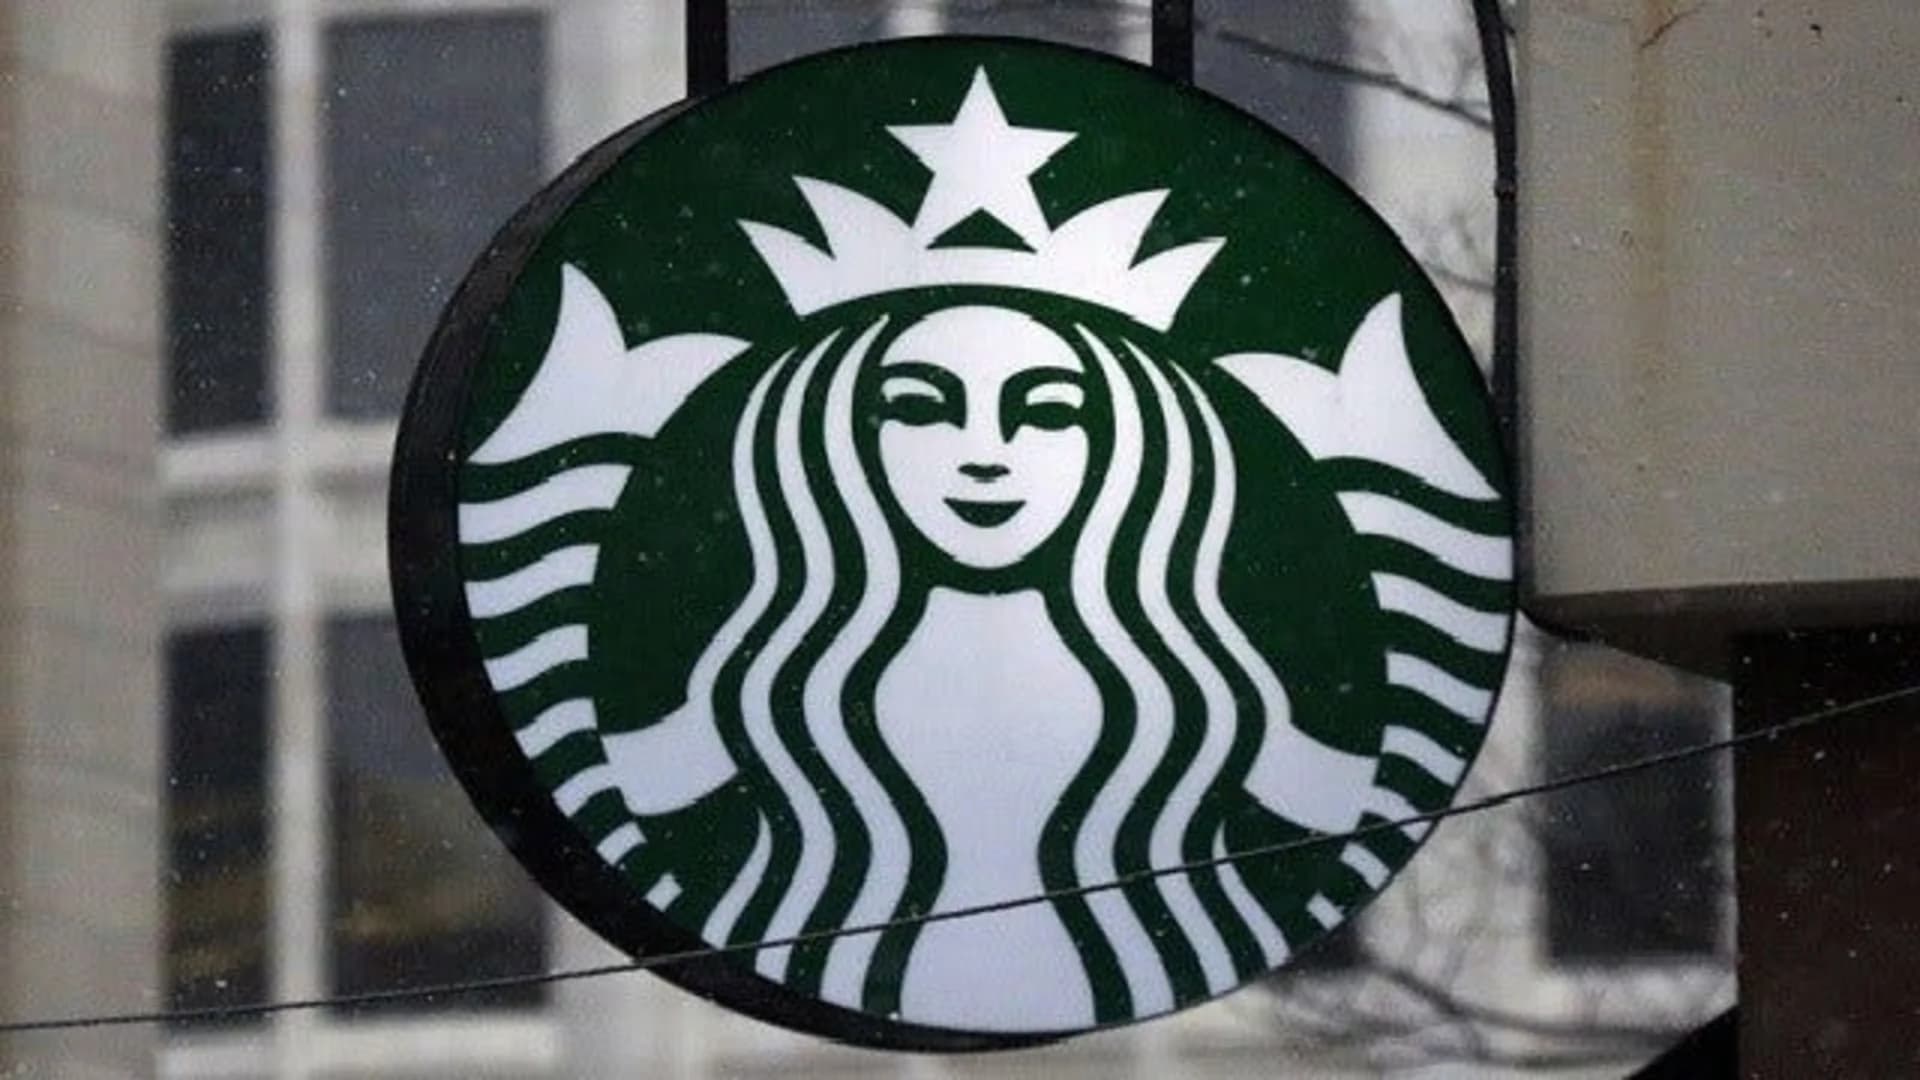 Starbucks gives workers raises, stock grants due to tax law